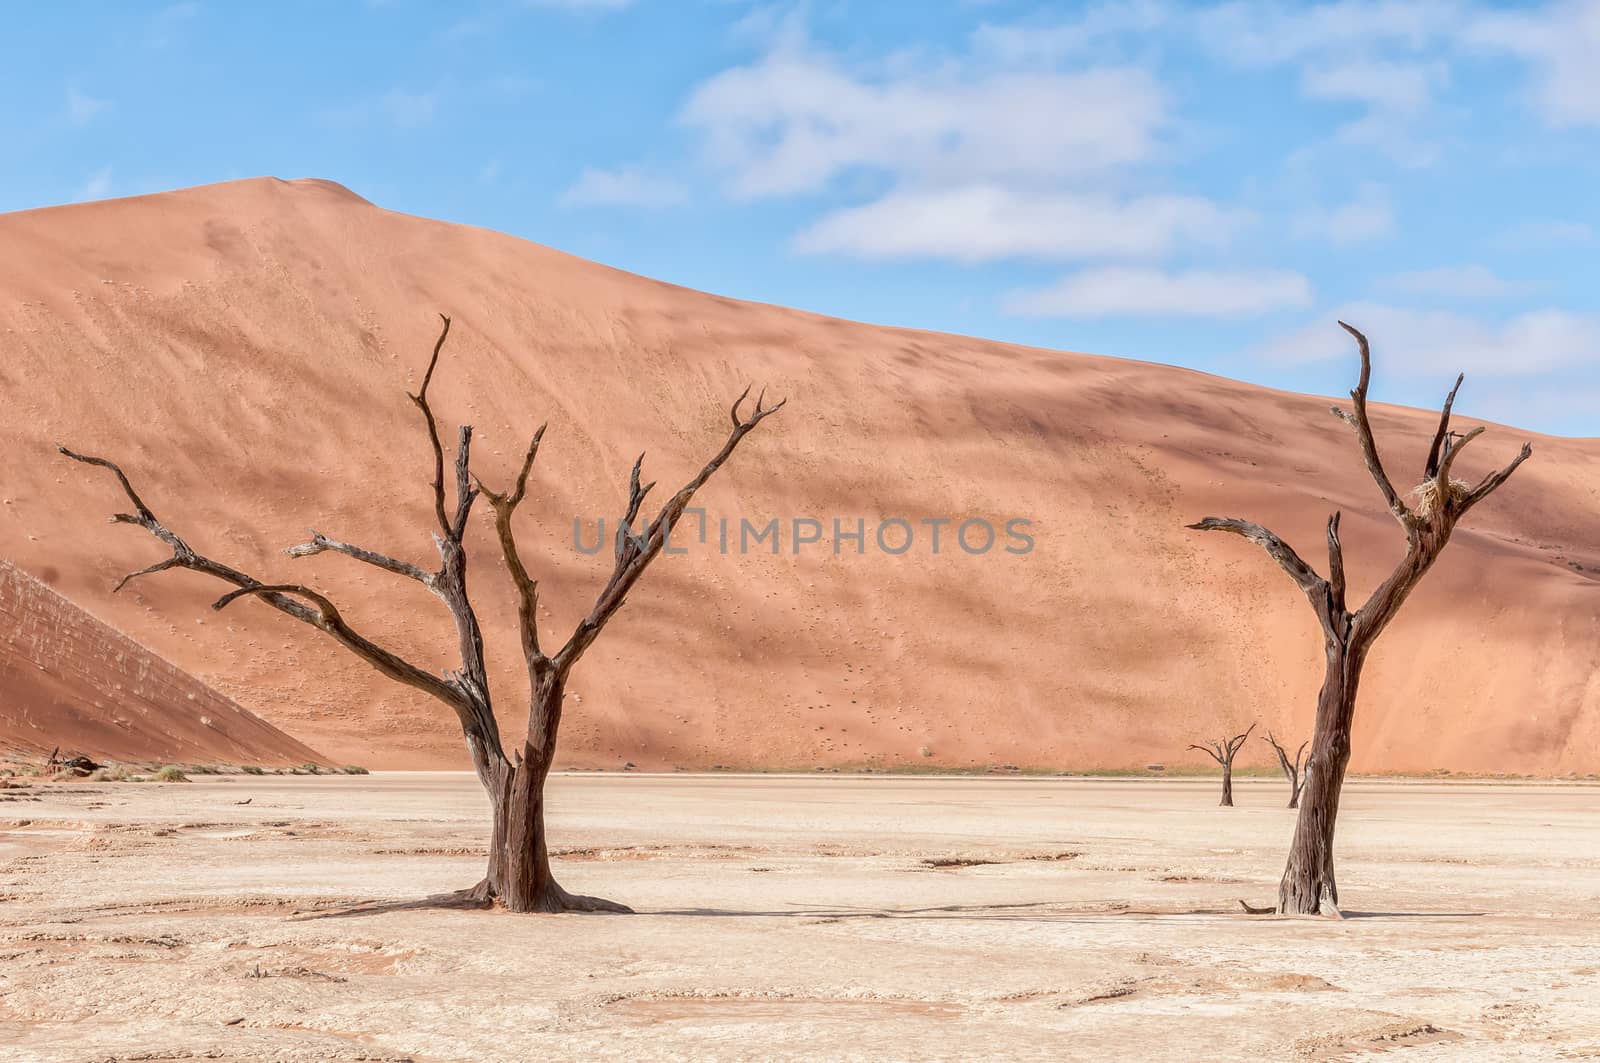 Dead tree stumps, with sand dune backdrop, at Deadvlei by dpreezg